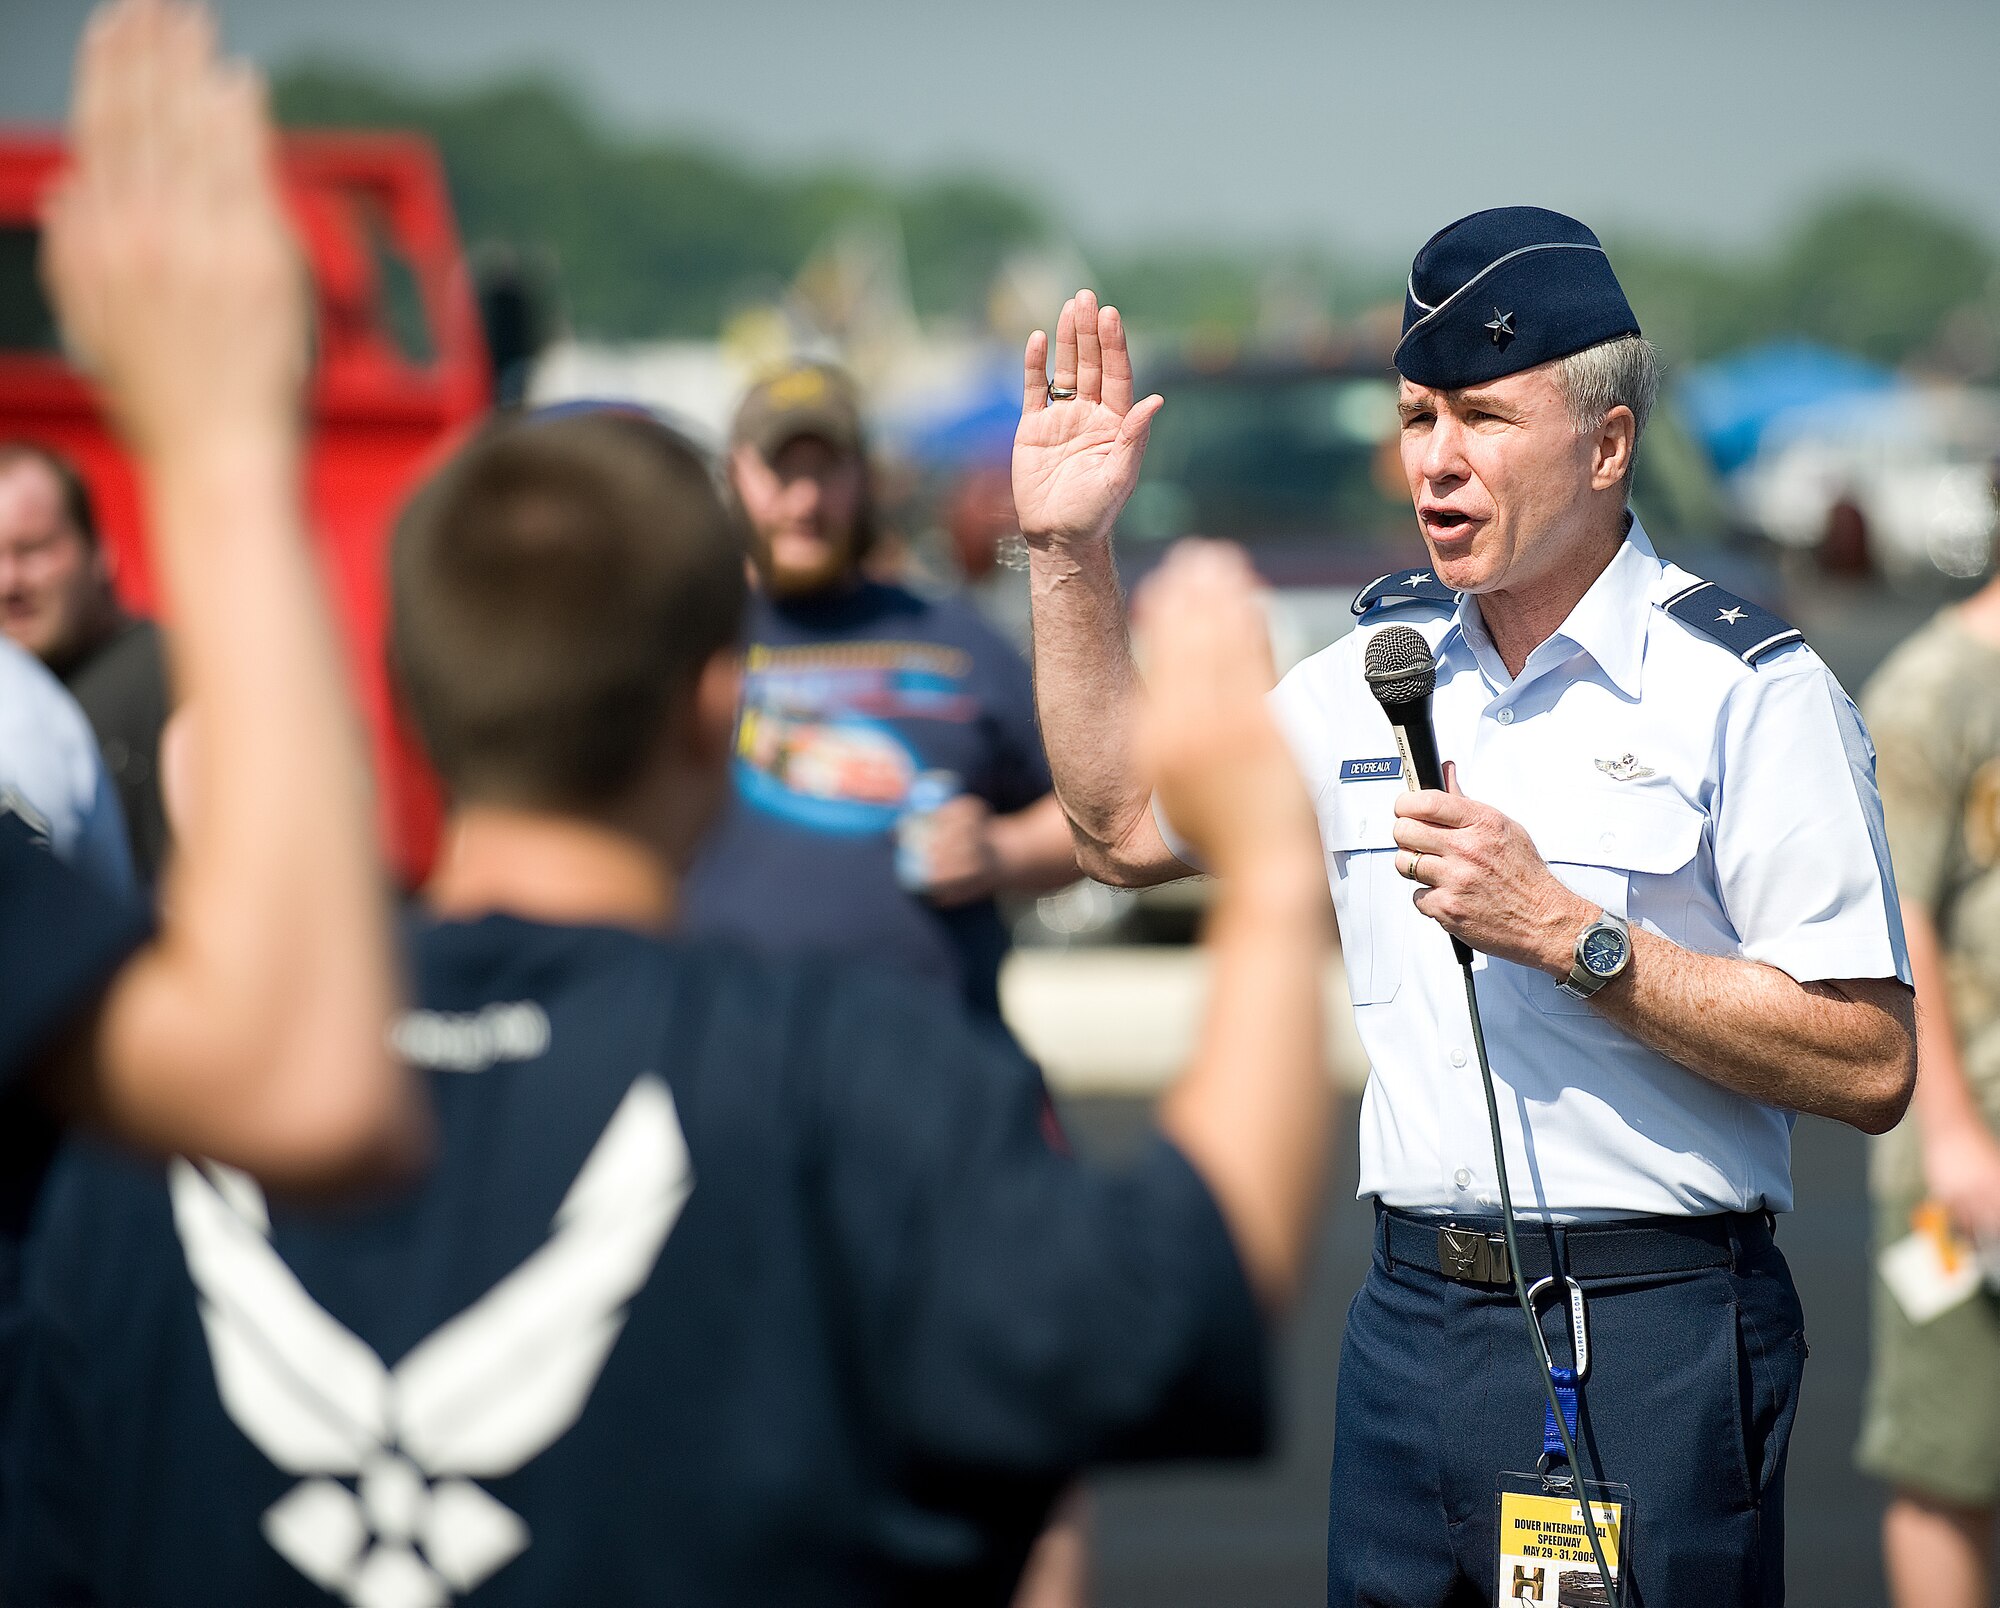 Brig. Gen. Richard Devereaux, director of Intelligence, Operations and Nuclear Integration, Air Education and Training Command; swears in Air Force recruits at Dover Downs May 31.  (U.S. Air Force photo/Jason Minto)